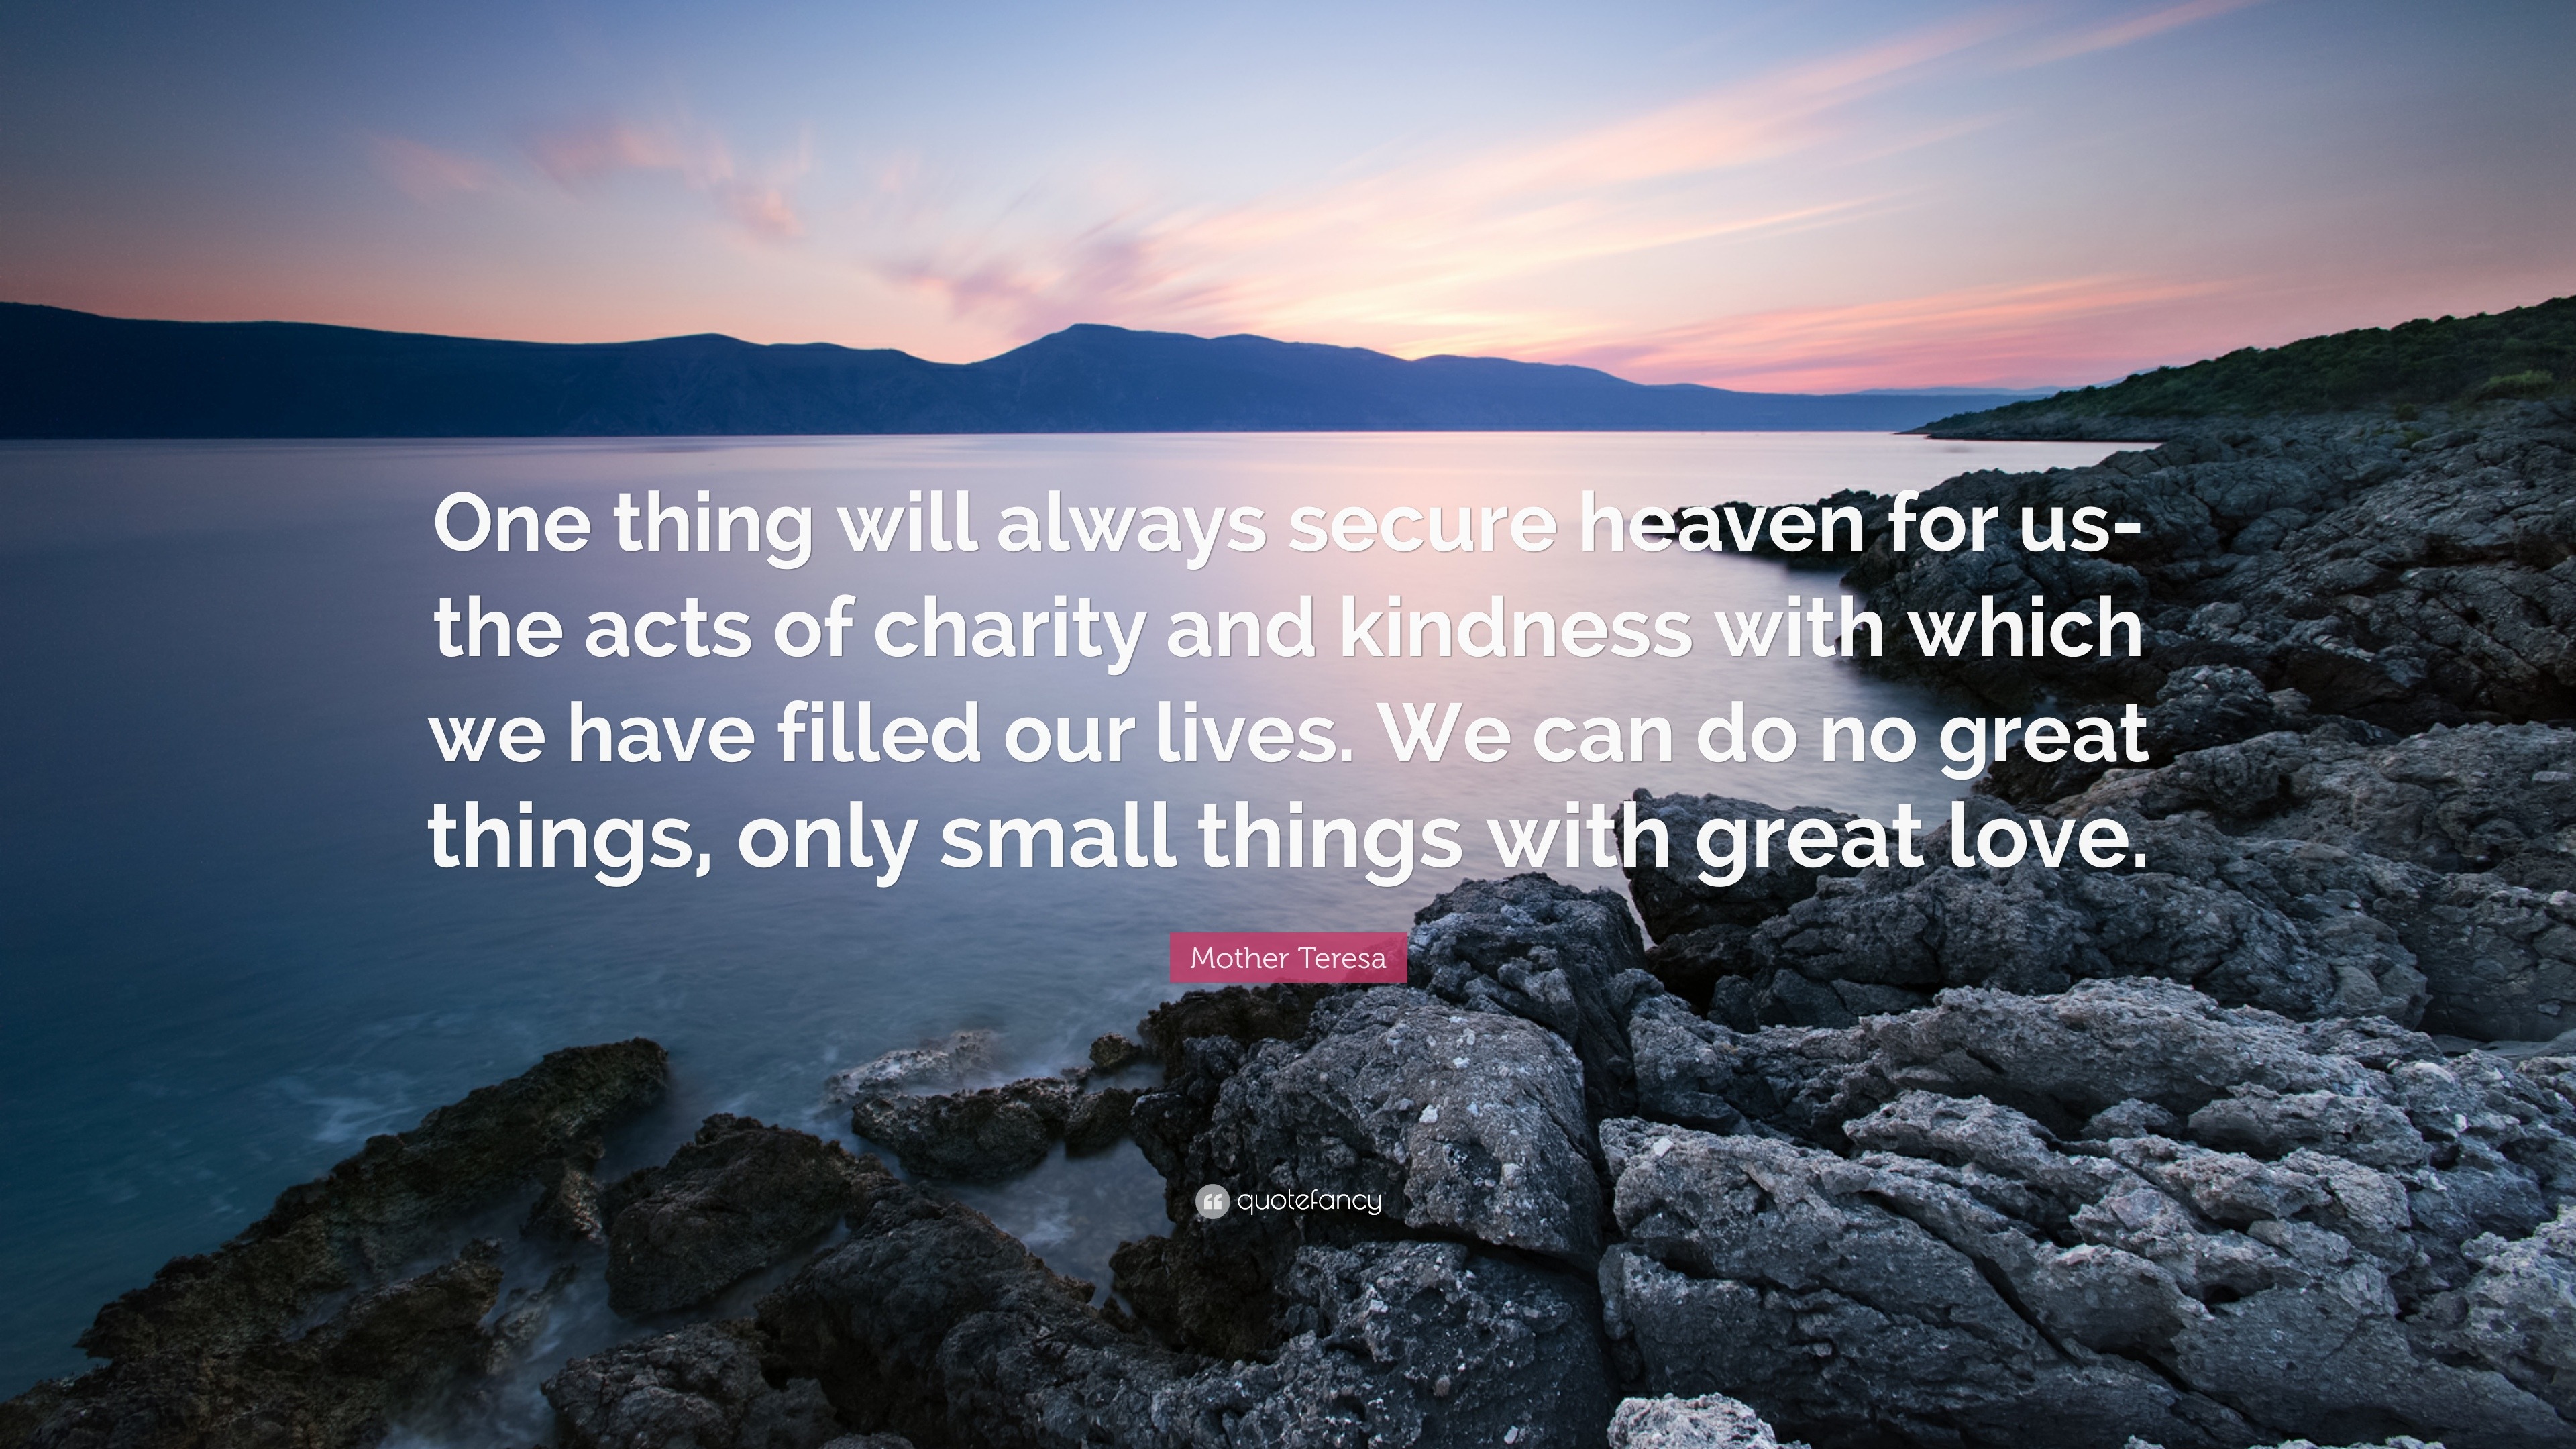 Mother Teresa Quote “ e thing will always secure heaven for us the acts